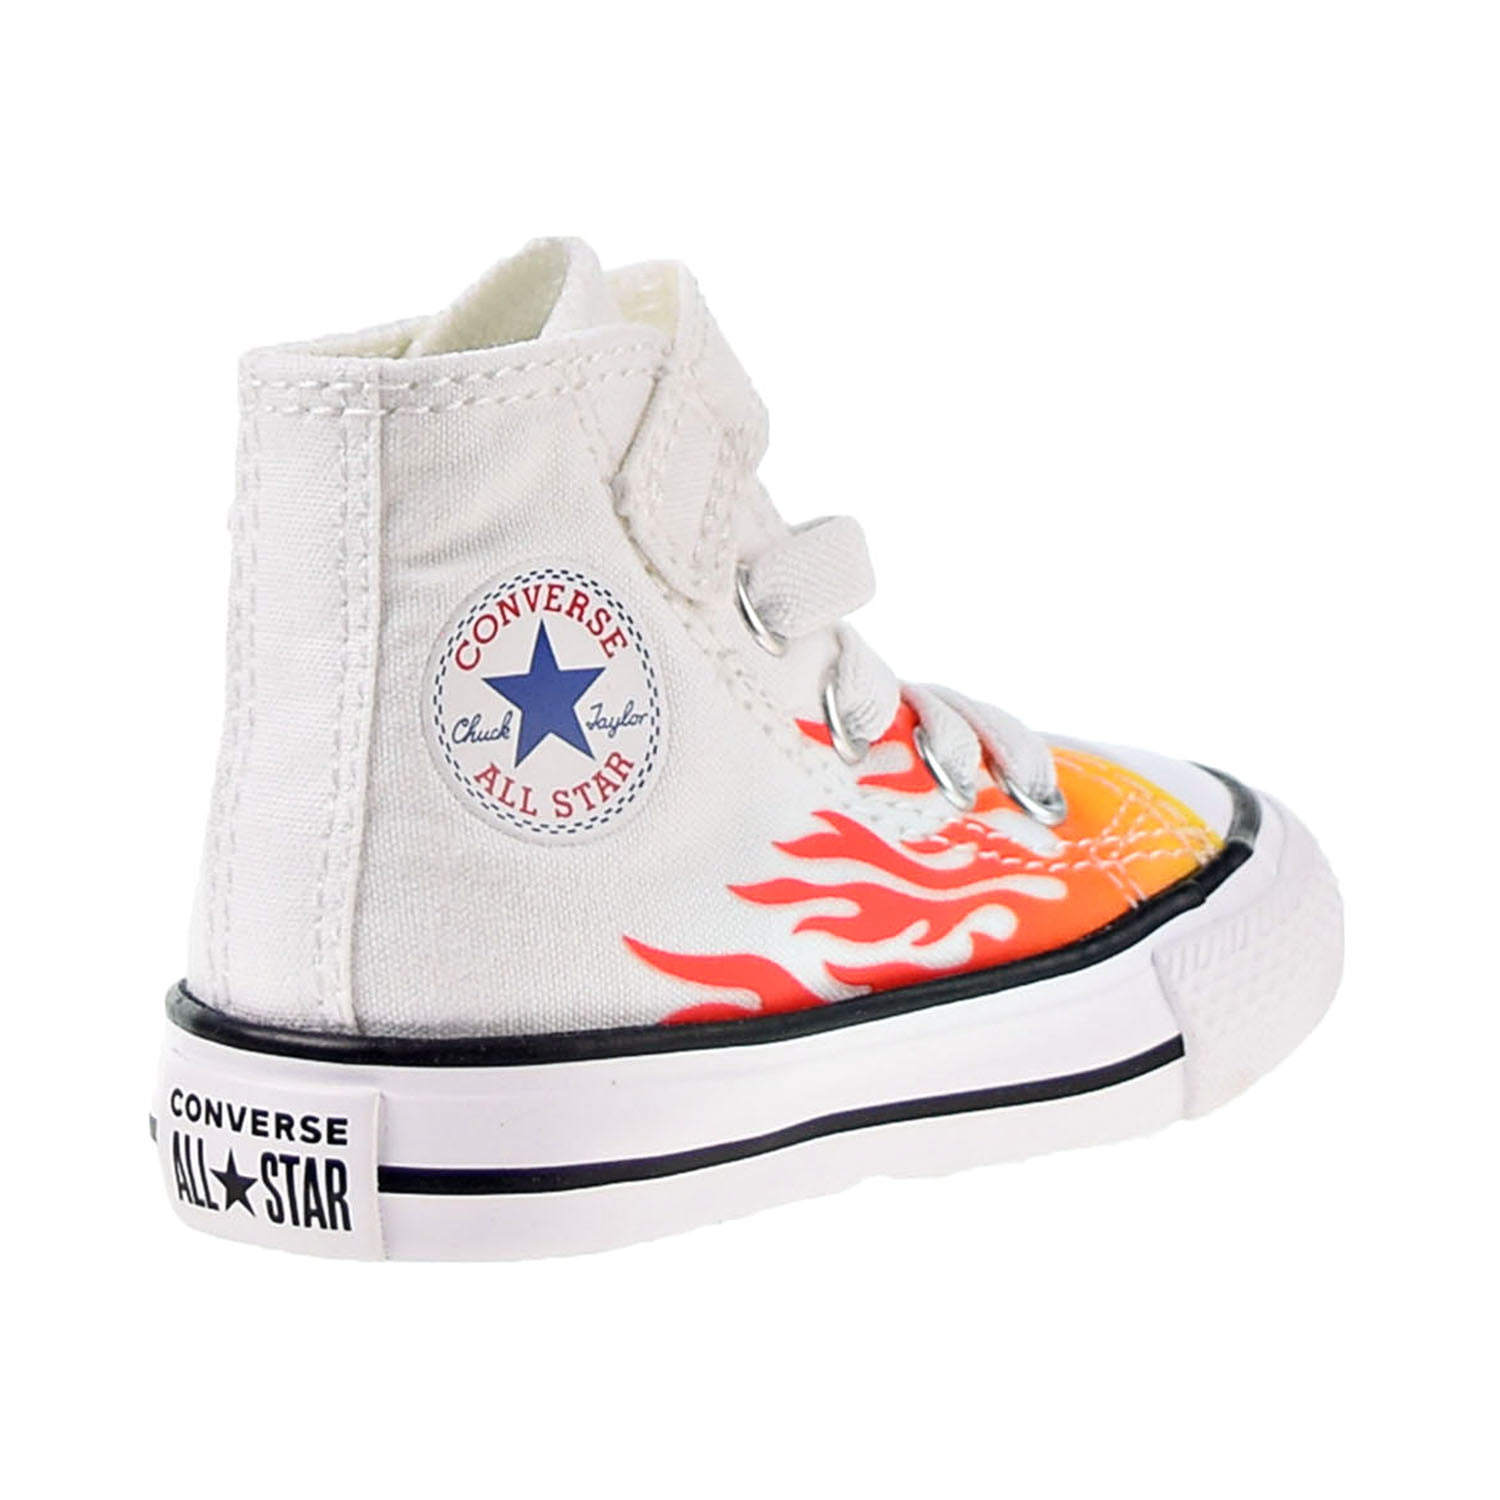 verstoring mooi jaloezie Converse Chuck Taylor All Star 1V HI Flames Toddler Shoes White-Red-Yellow  766198f - Walmart.com